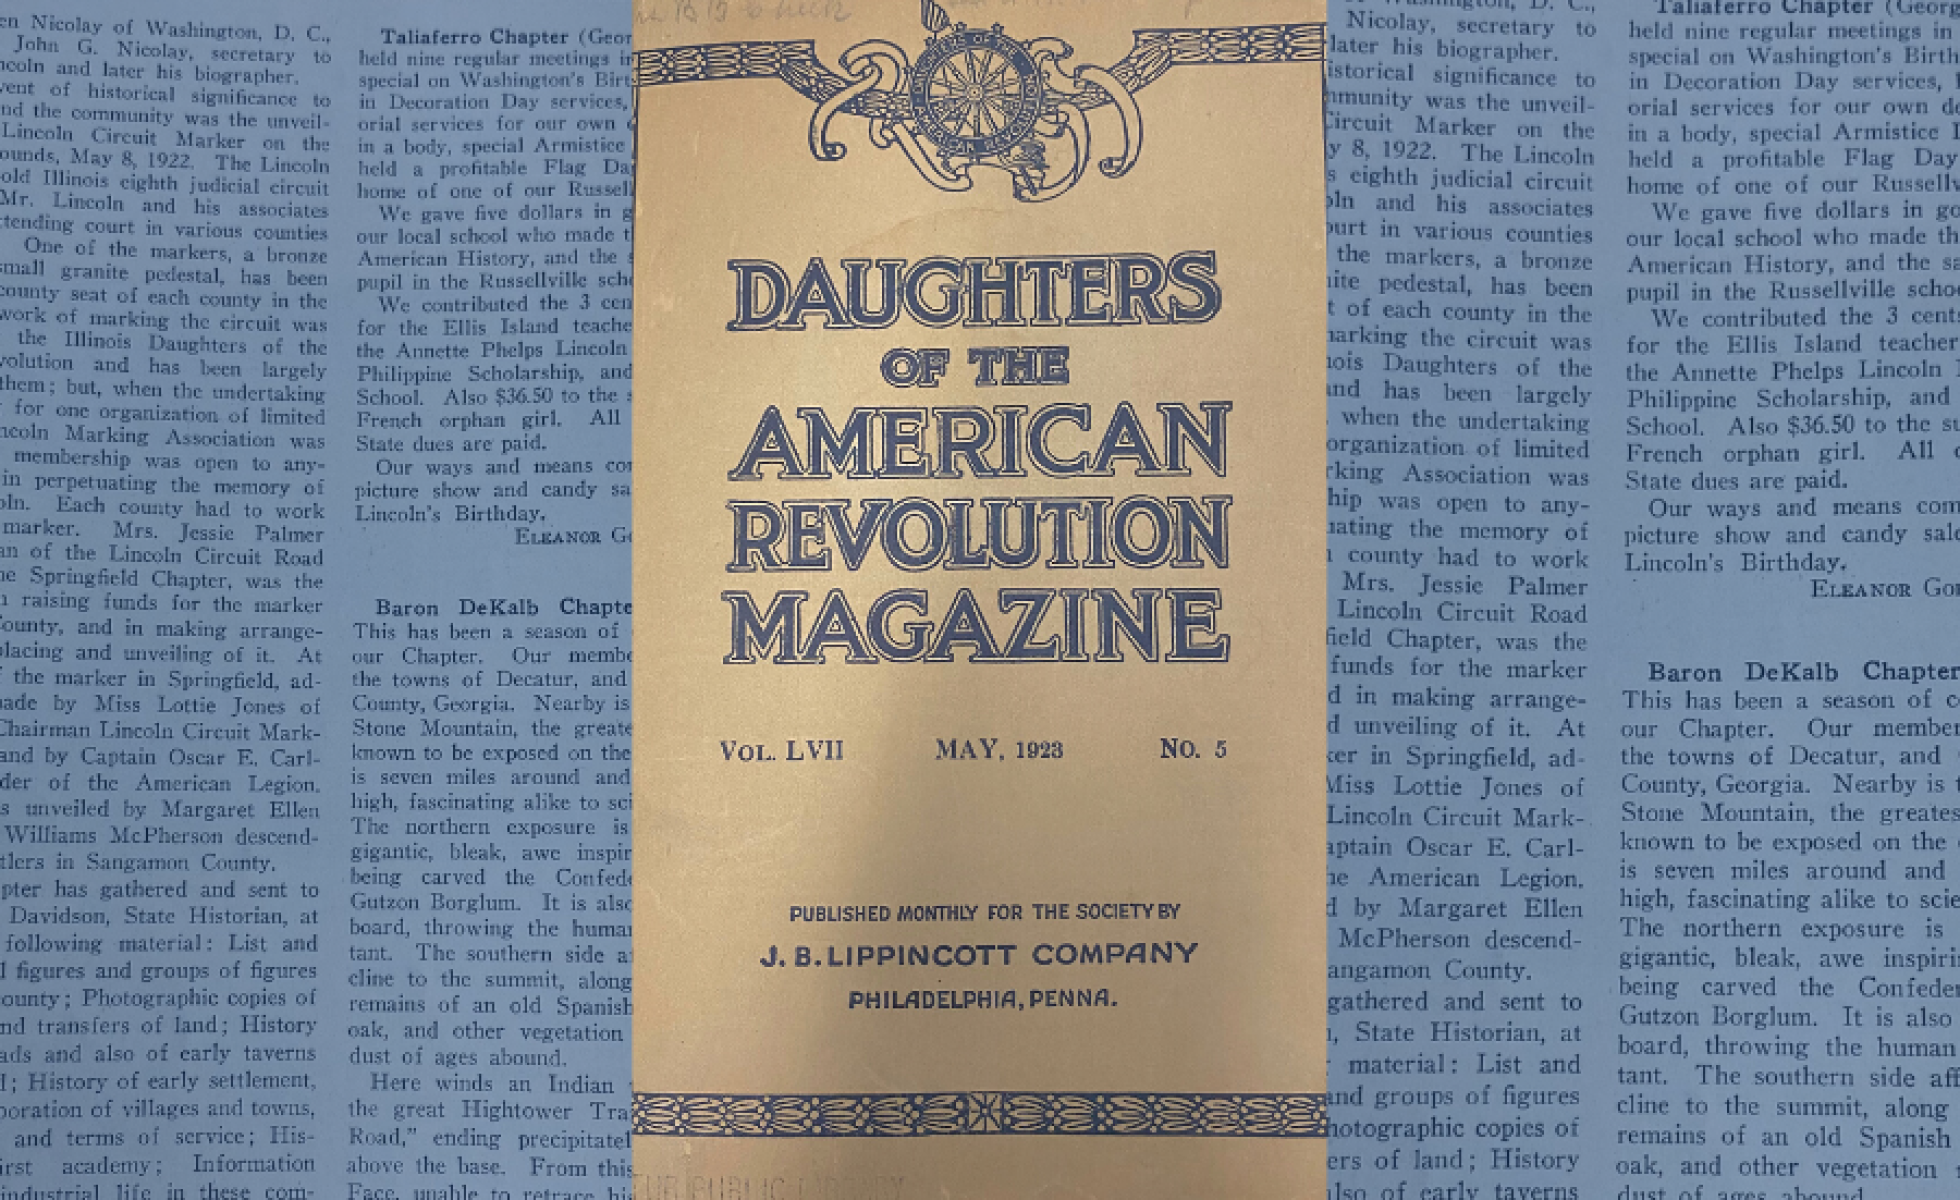 DAR Publications  Daughters of the American Revolution